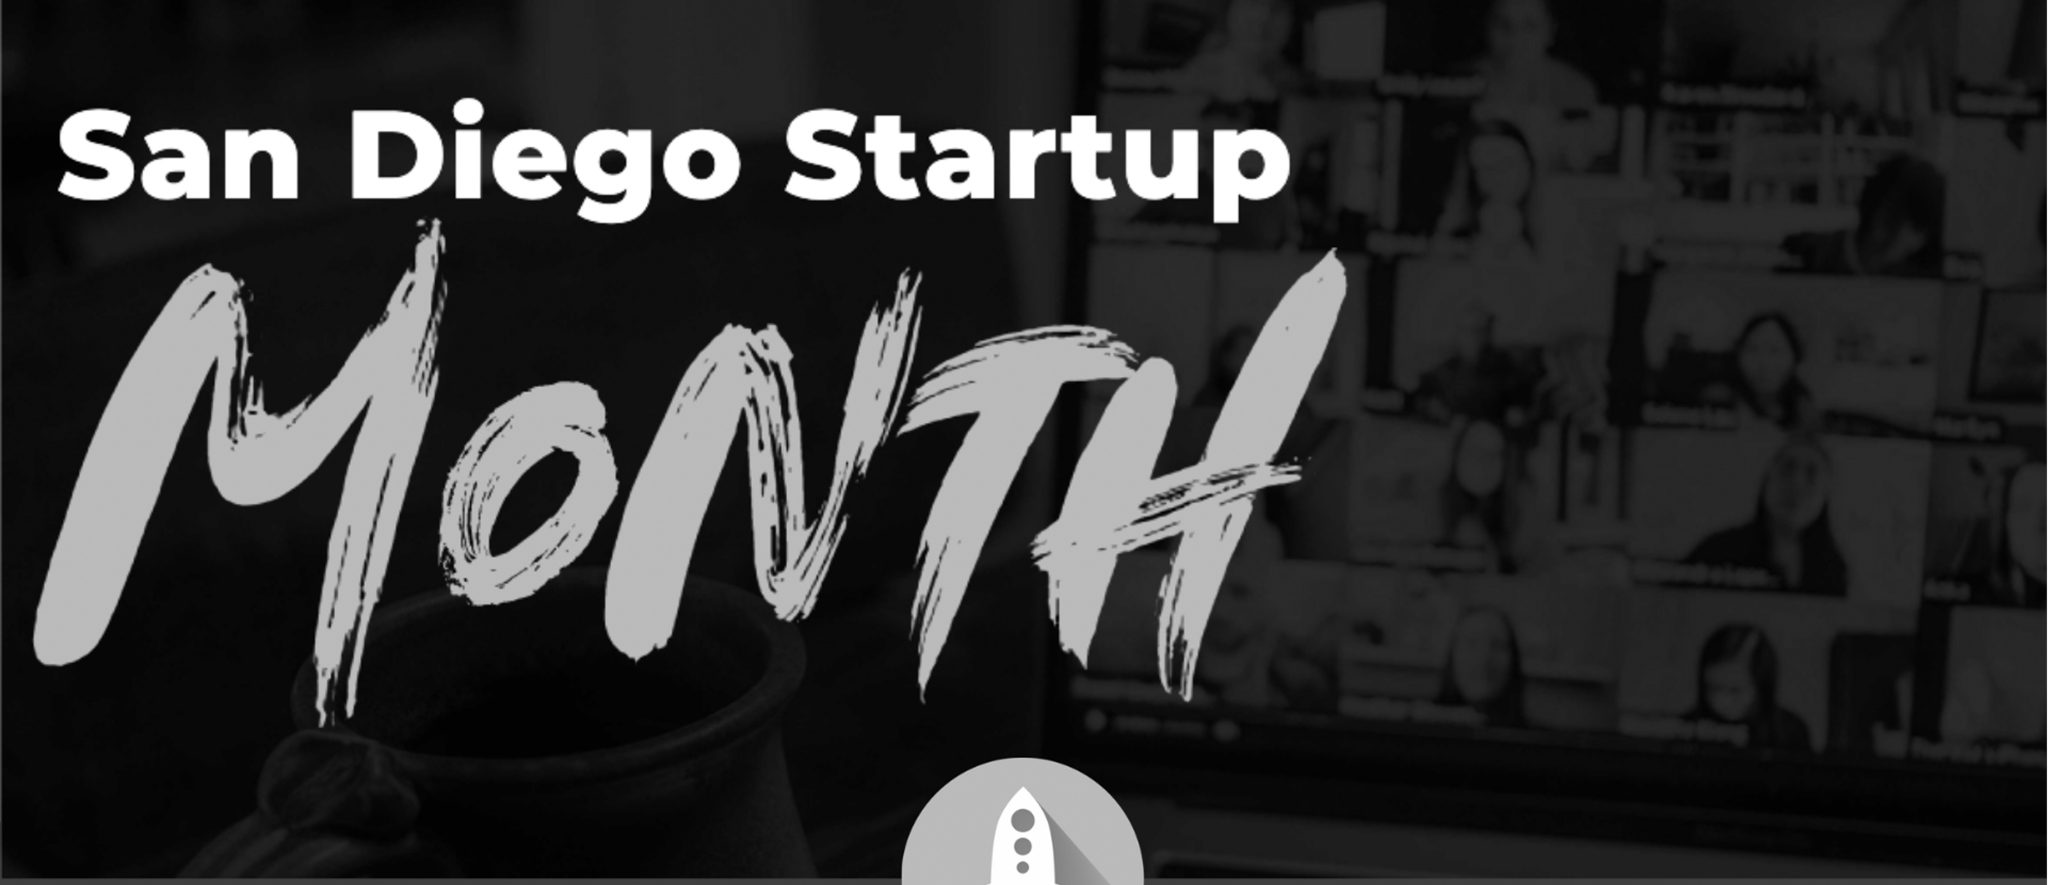 Growing my startup from zero to $100M – Lessons Learned